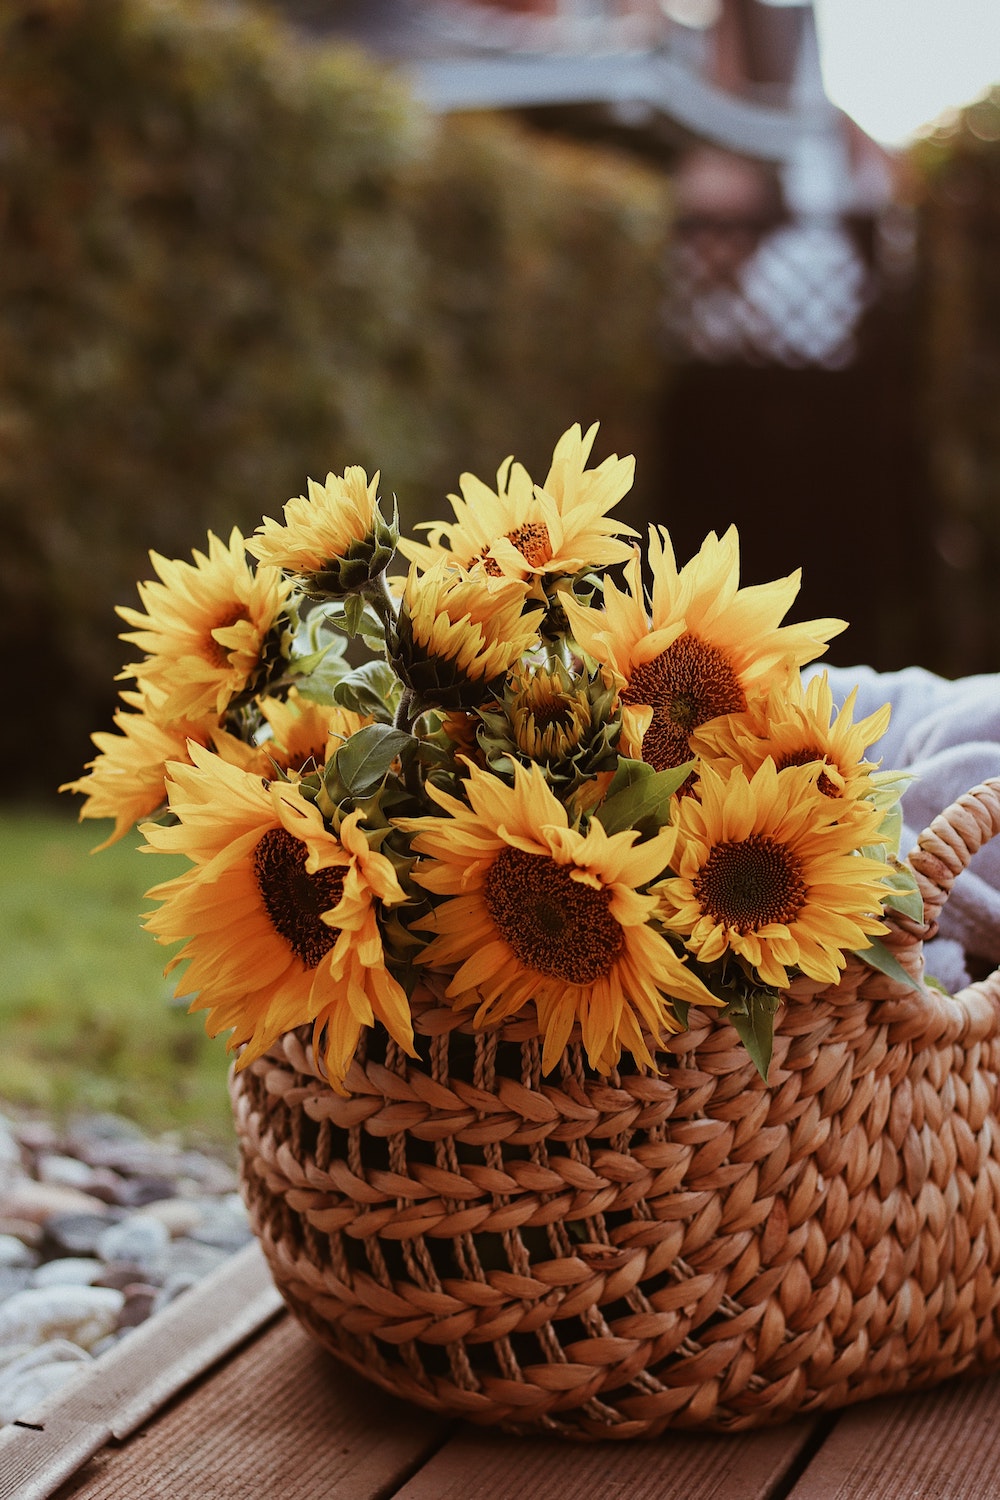 Helianthus Season - Everything You Need to Know About Sunflowers003